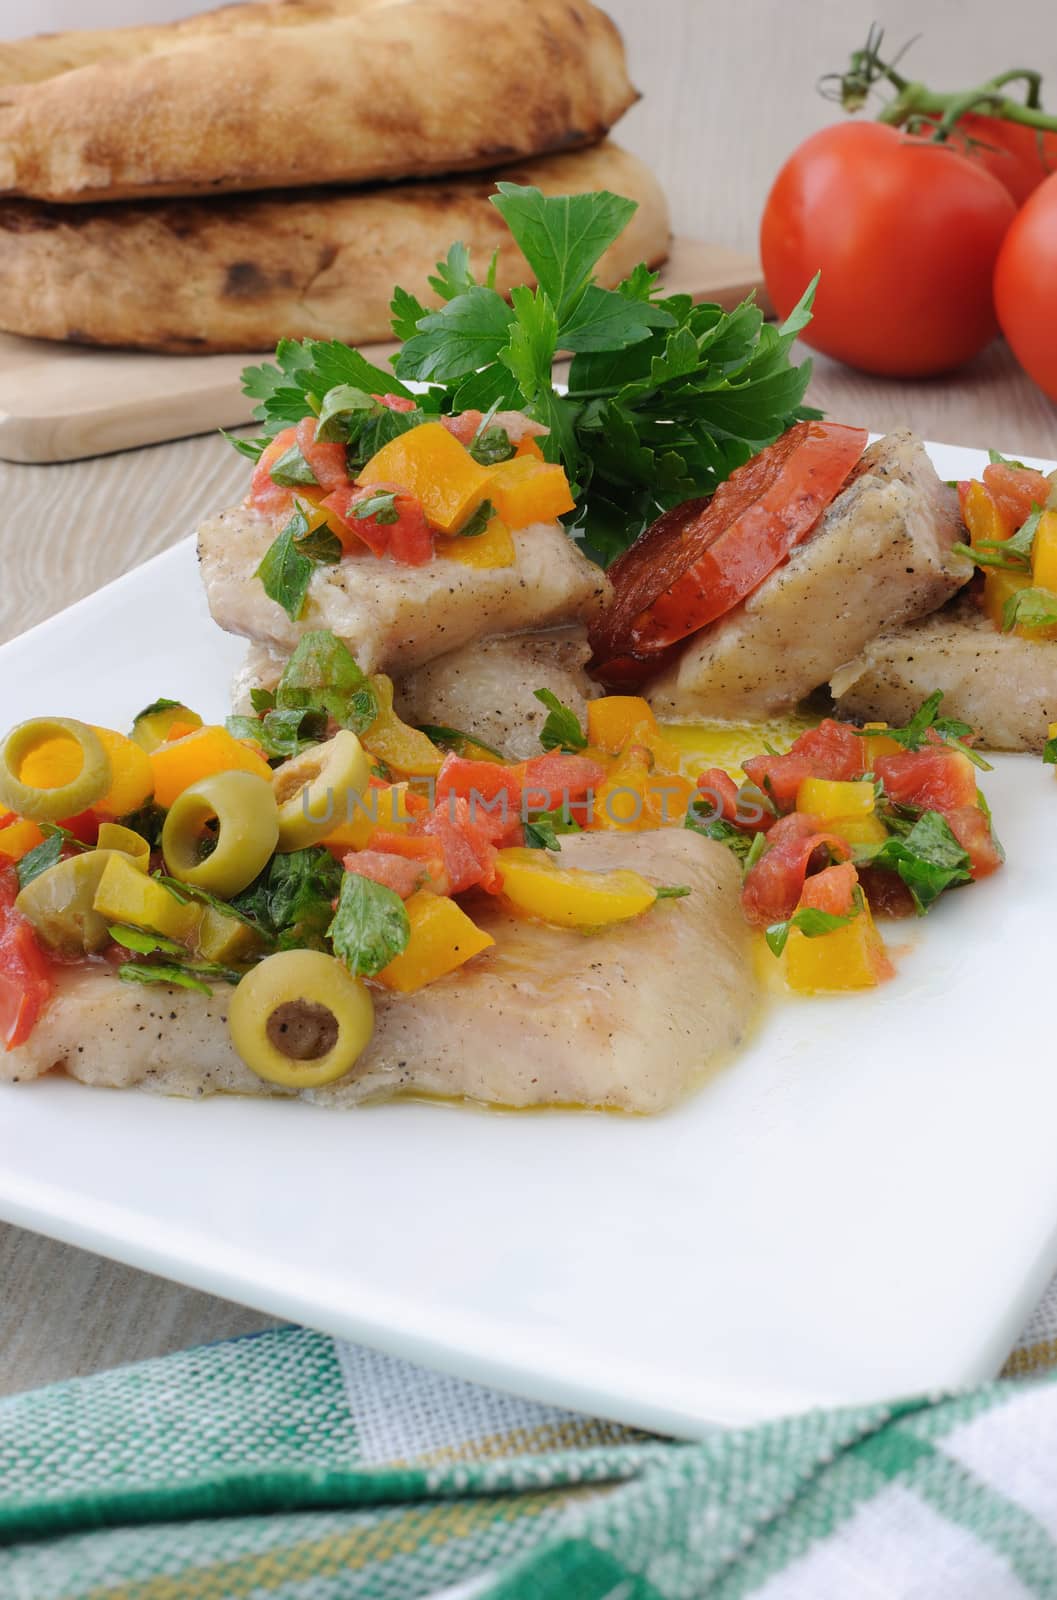 Fillet of fish under vegetables by Apolonia